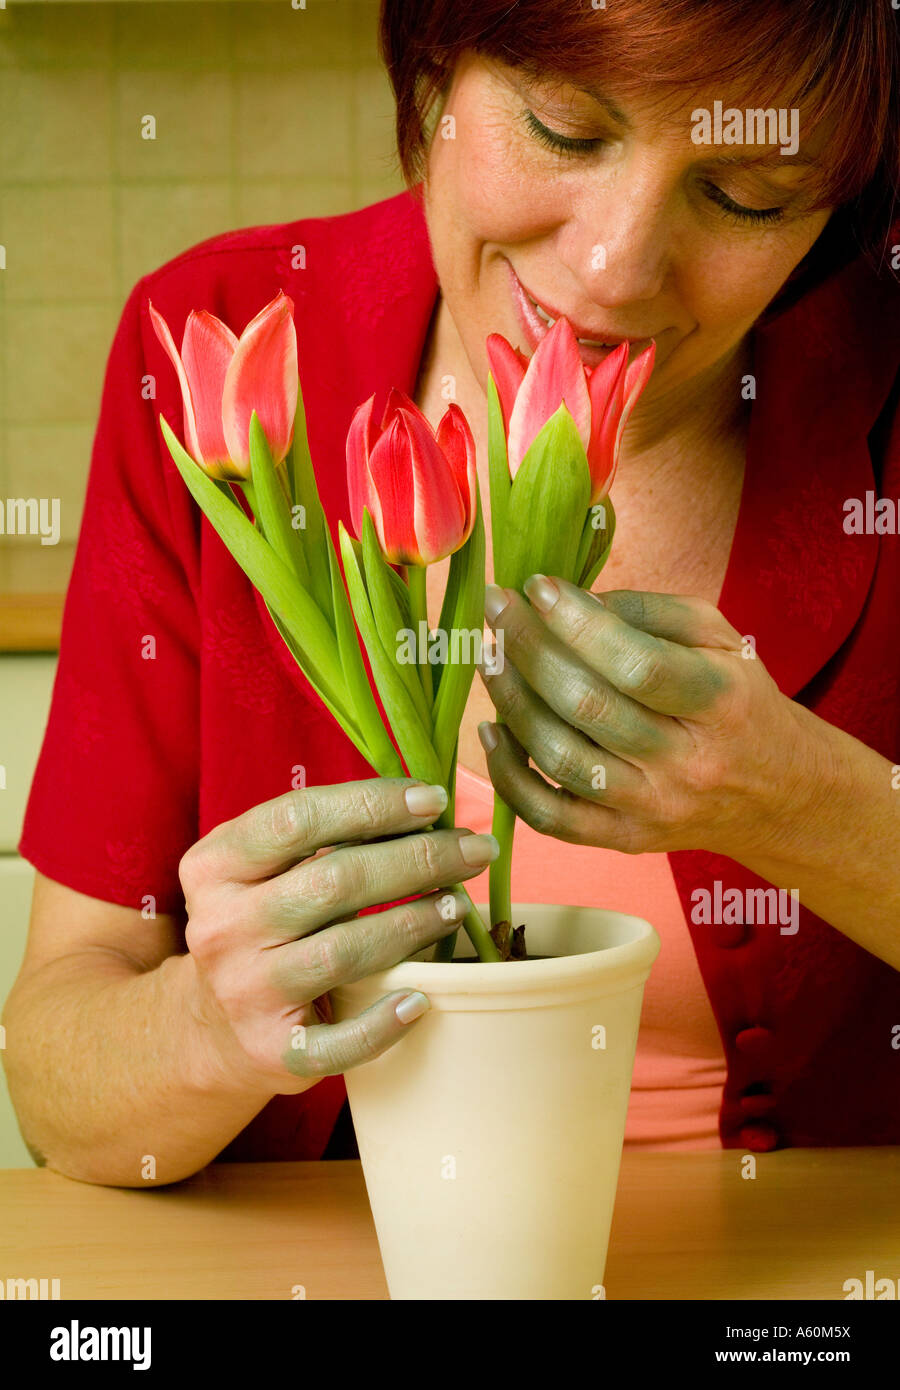 Woman with green fingers holds flowers Stock Photo